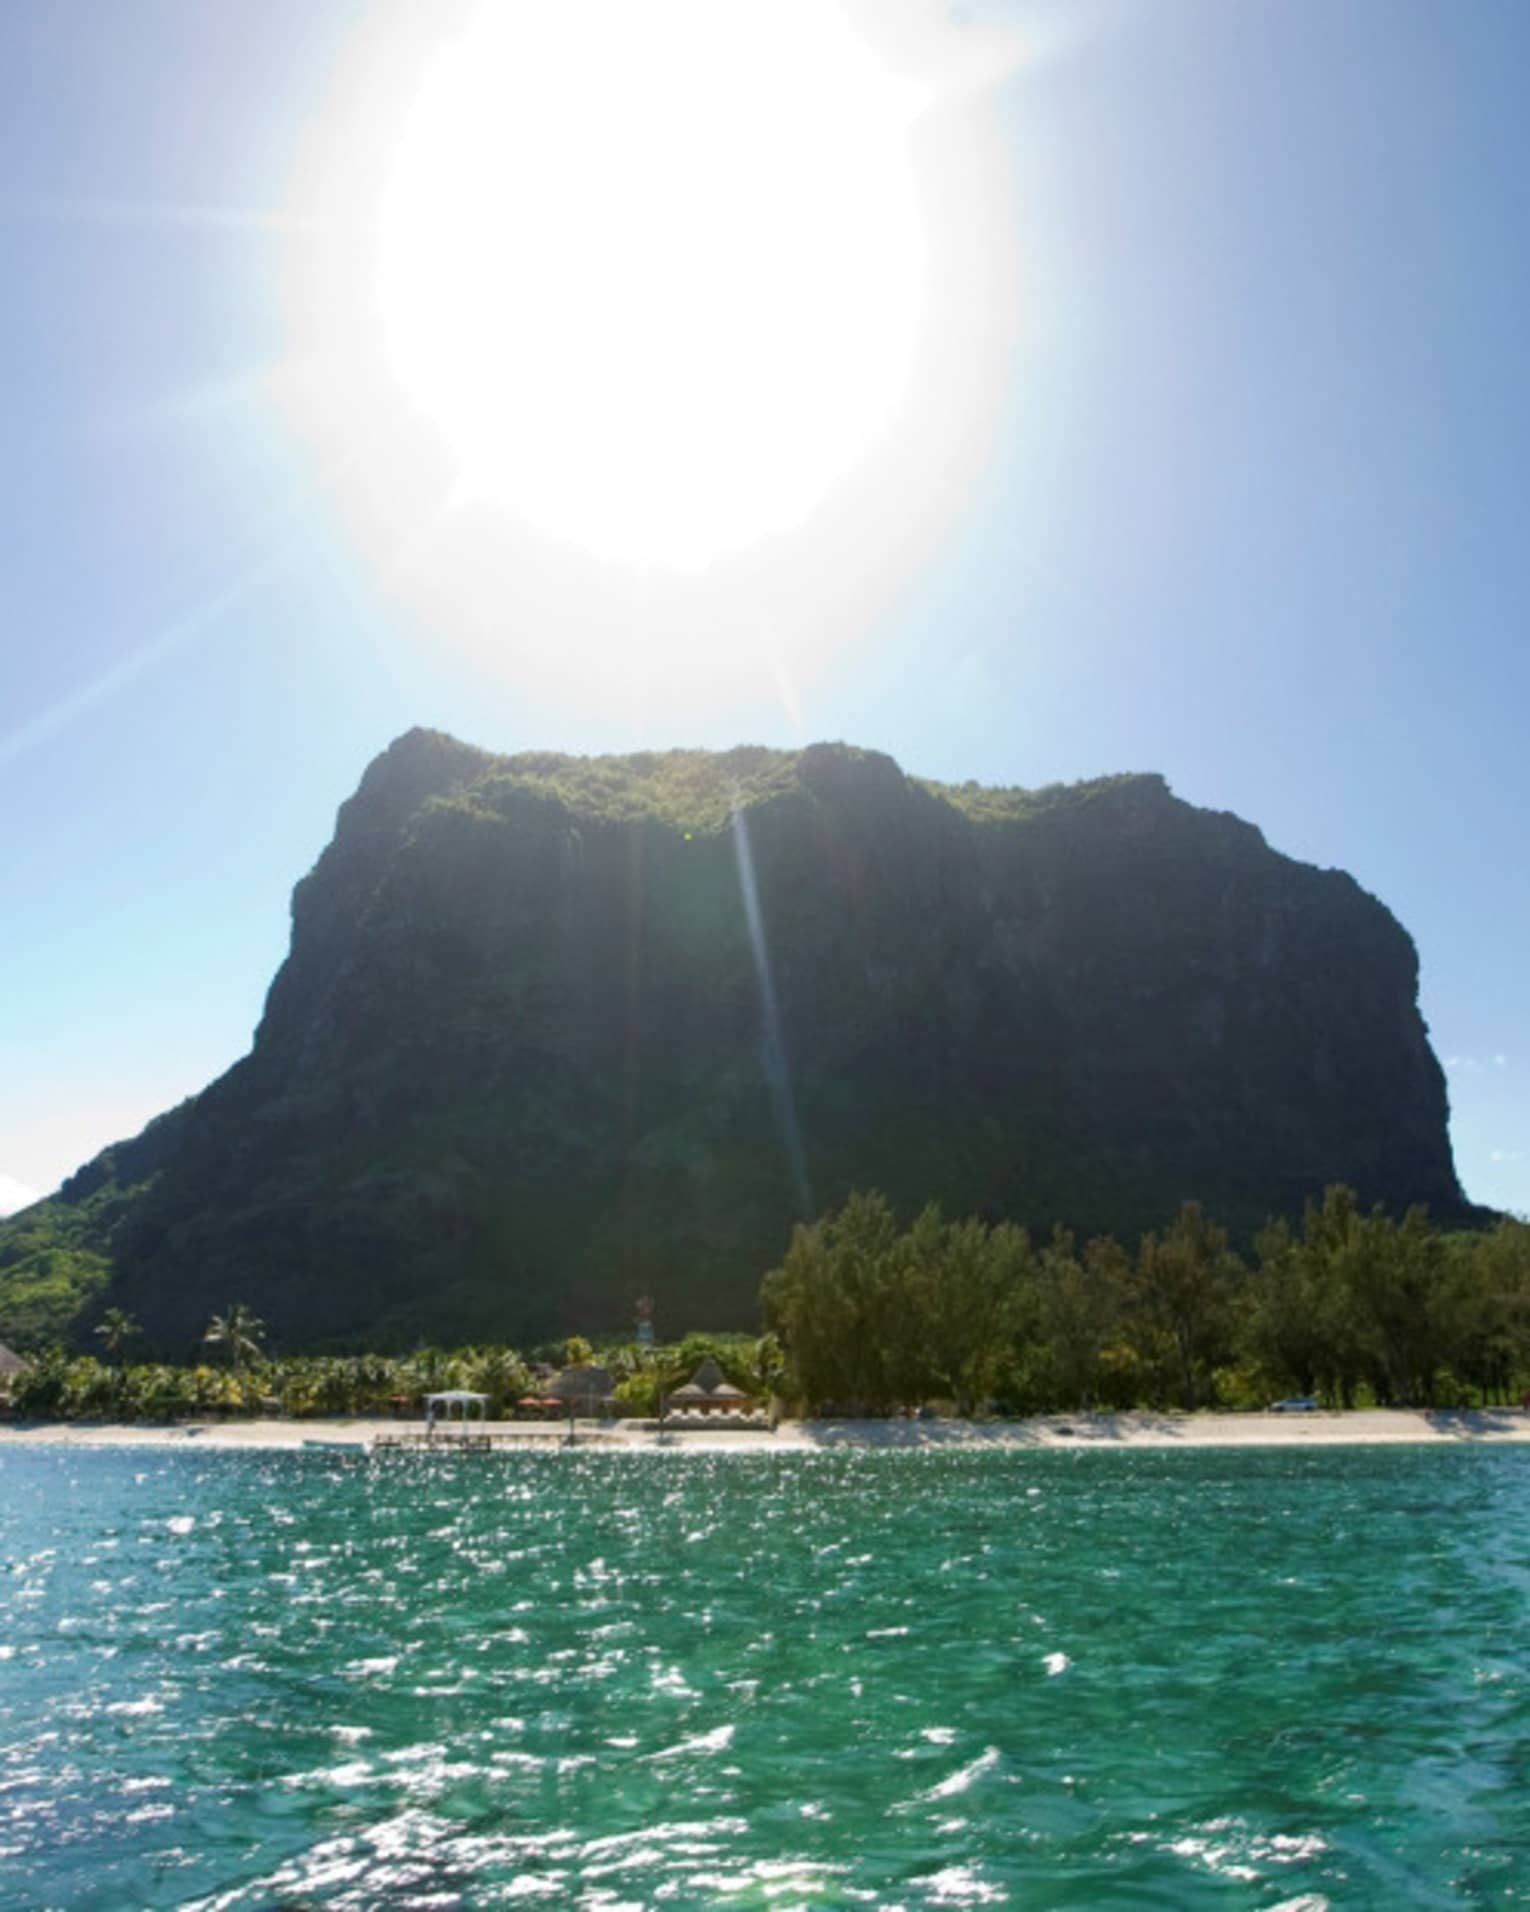 Long view of a forested monolith mountain sitting atop crystal waters. Sun beams down from above in a clear blue sky.